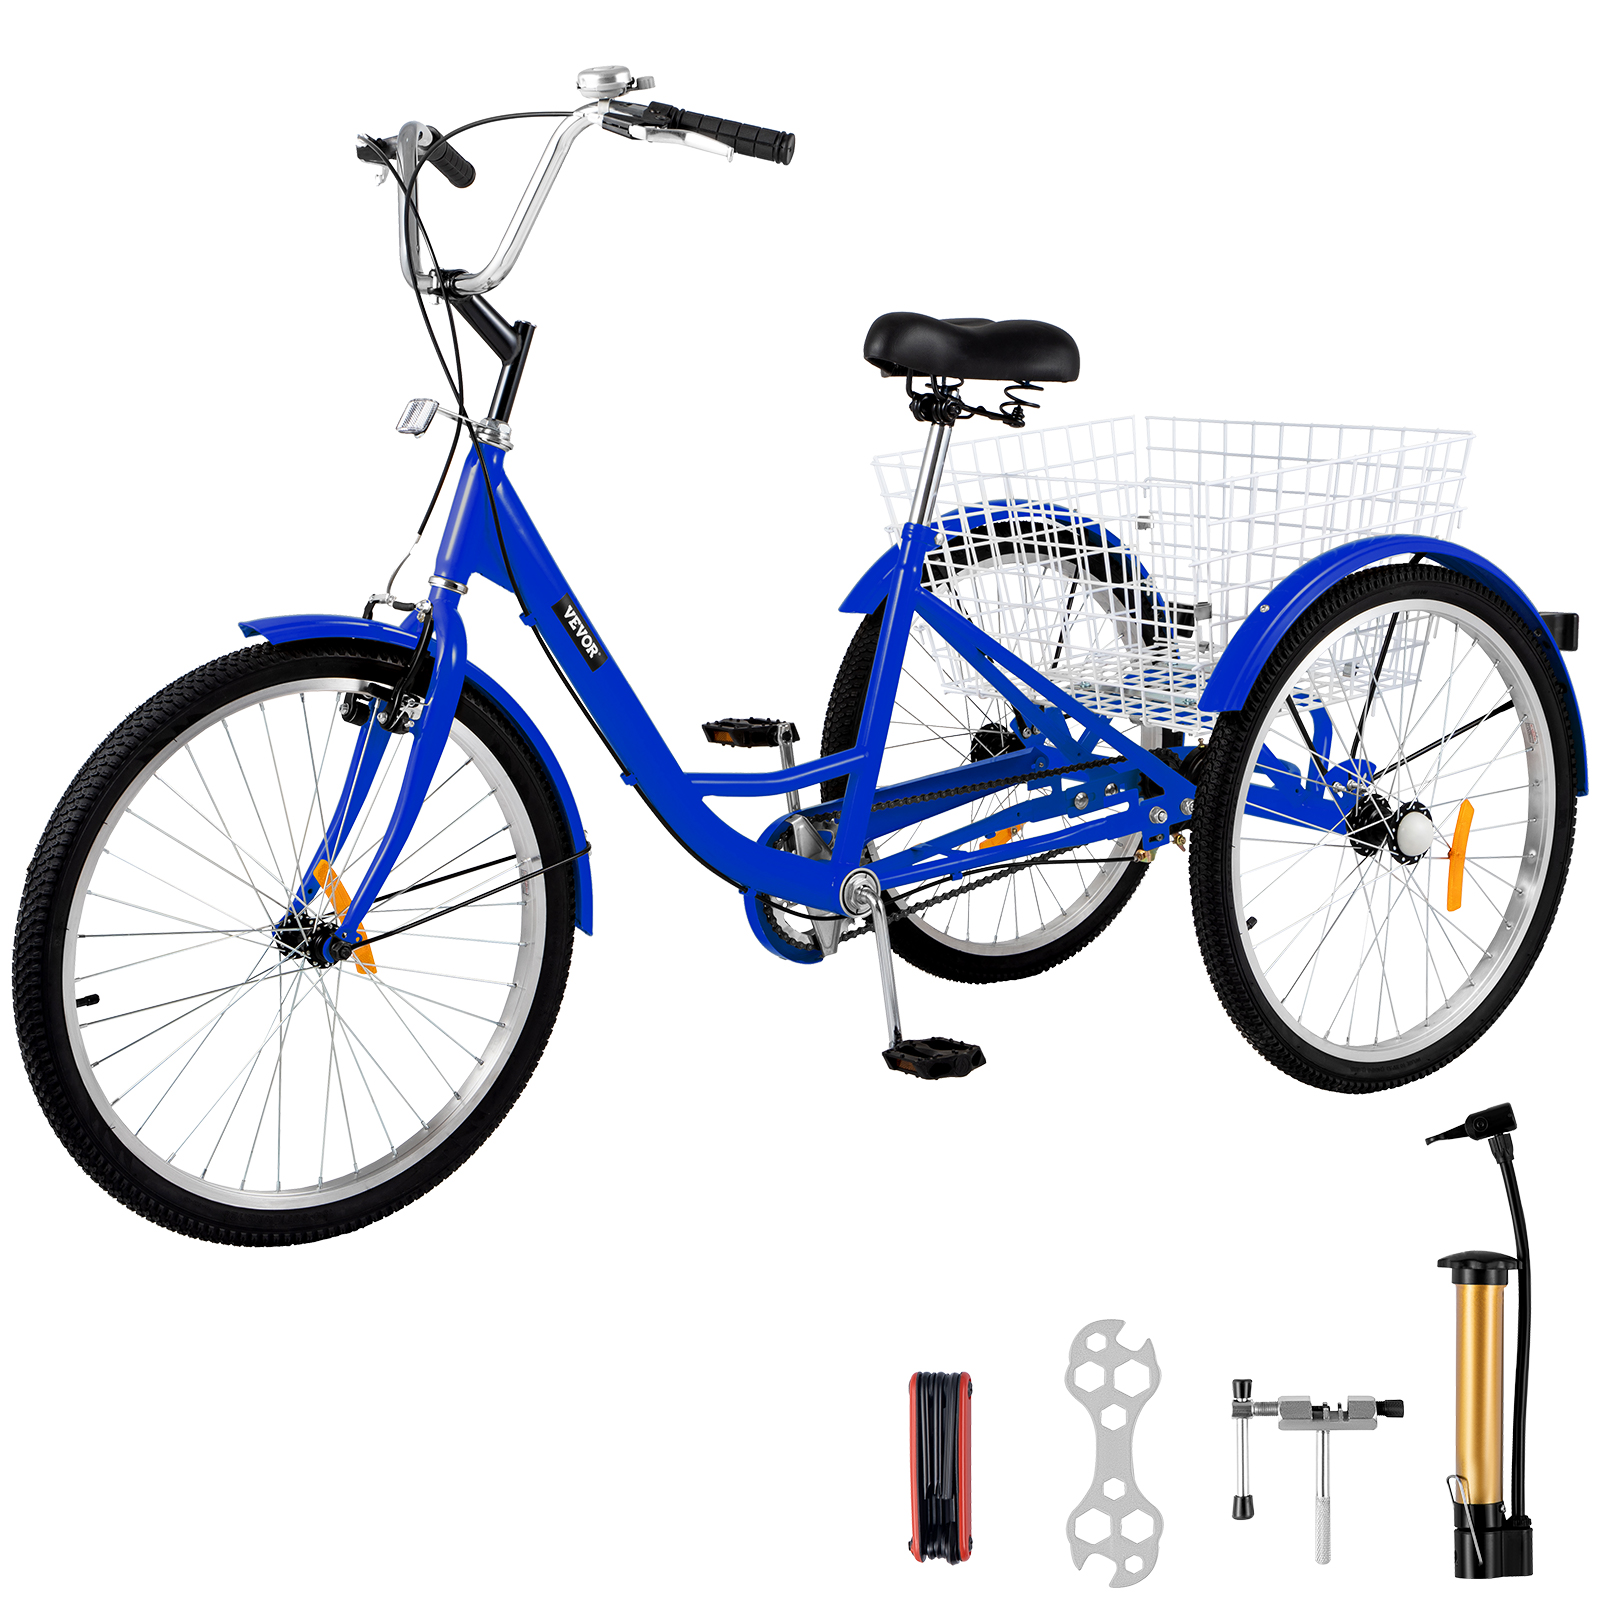 Adult Tricycle 24" 1-Speed 3 Wheel Blue Exercise Shopping Bicycle Large Basket от Vevor Many GEOs